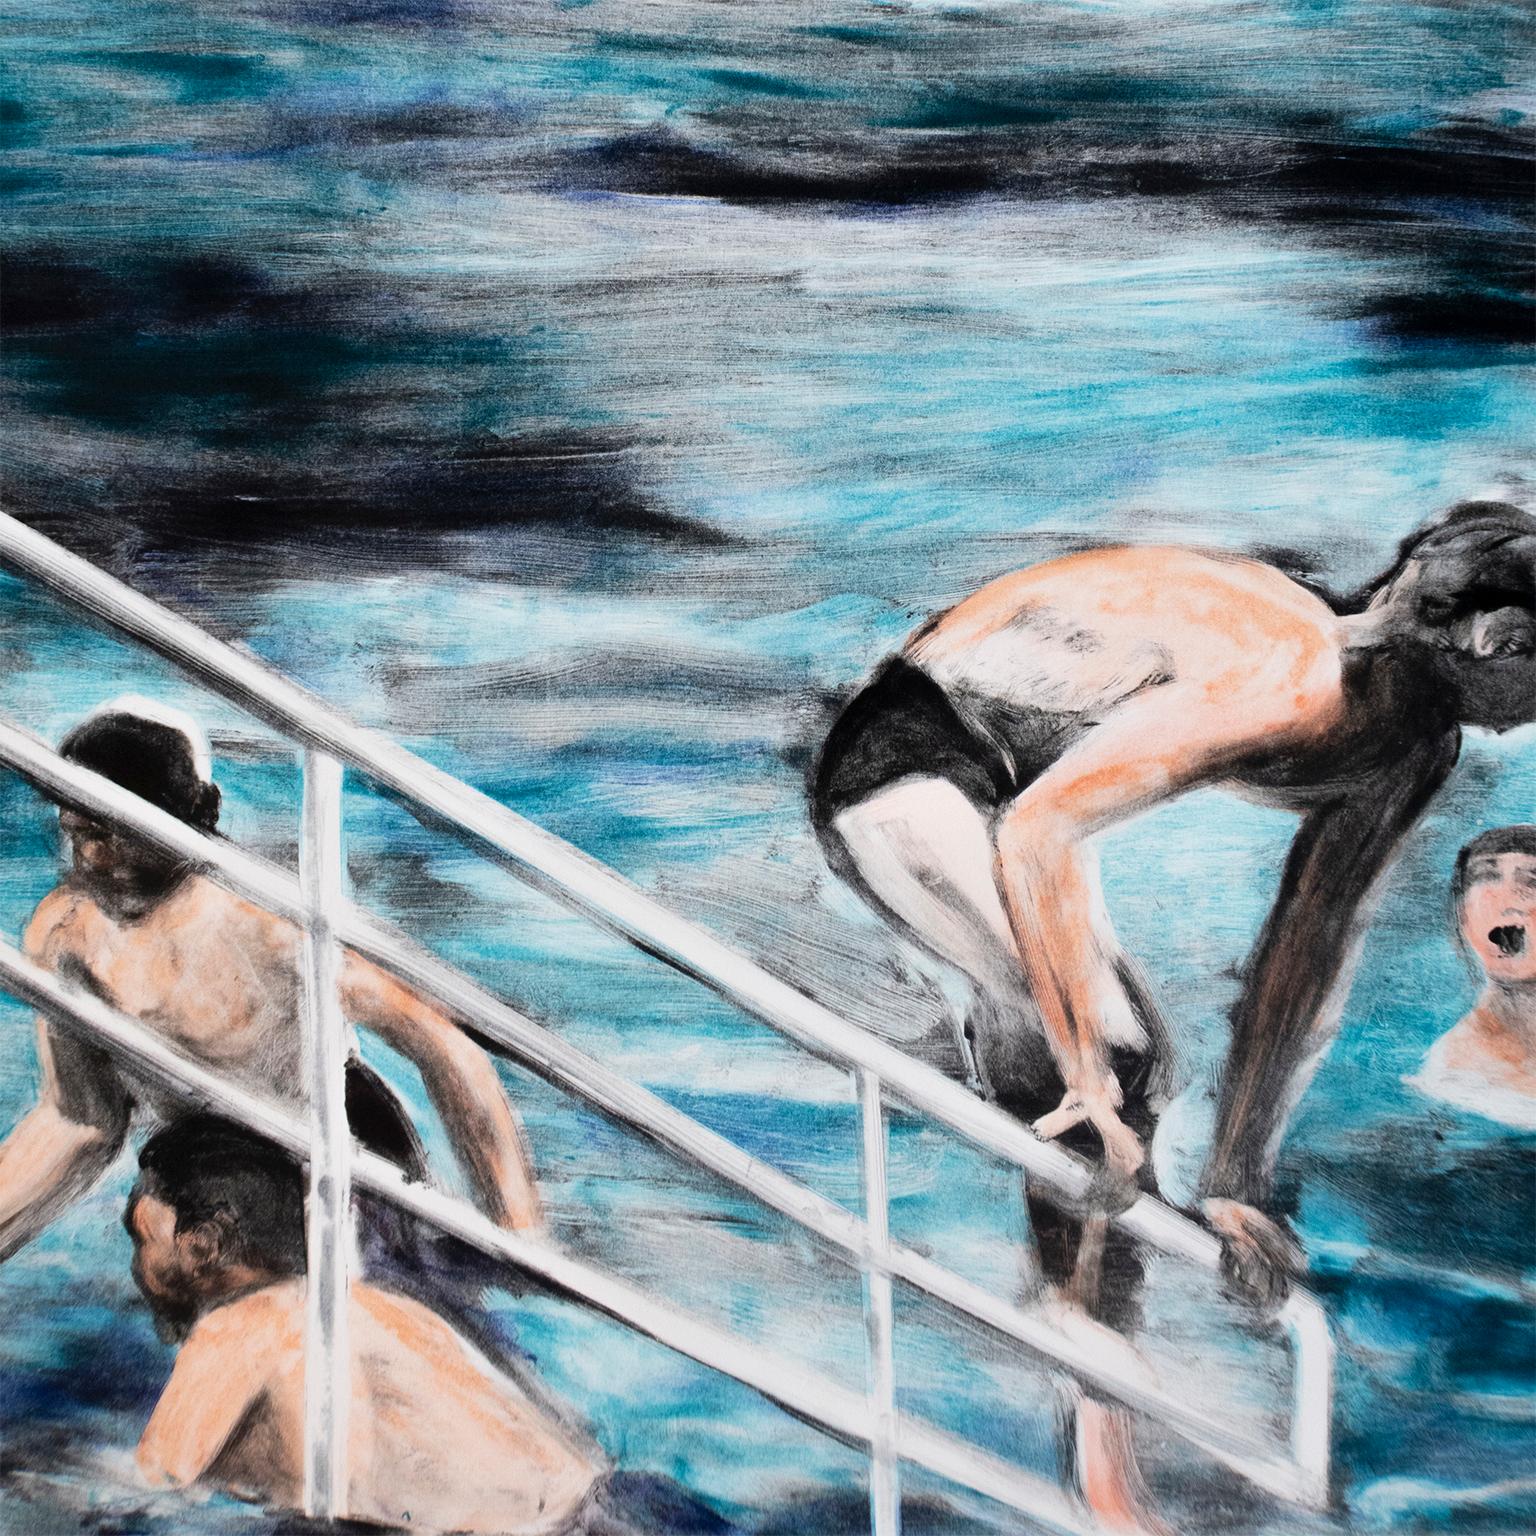 Temptation to Exist: waterscape Monotype painting of swimmers city landscape  - Gray Landscape Print by Michele Zalopany